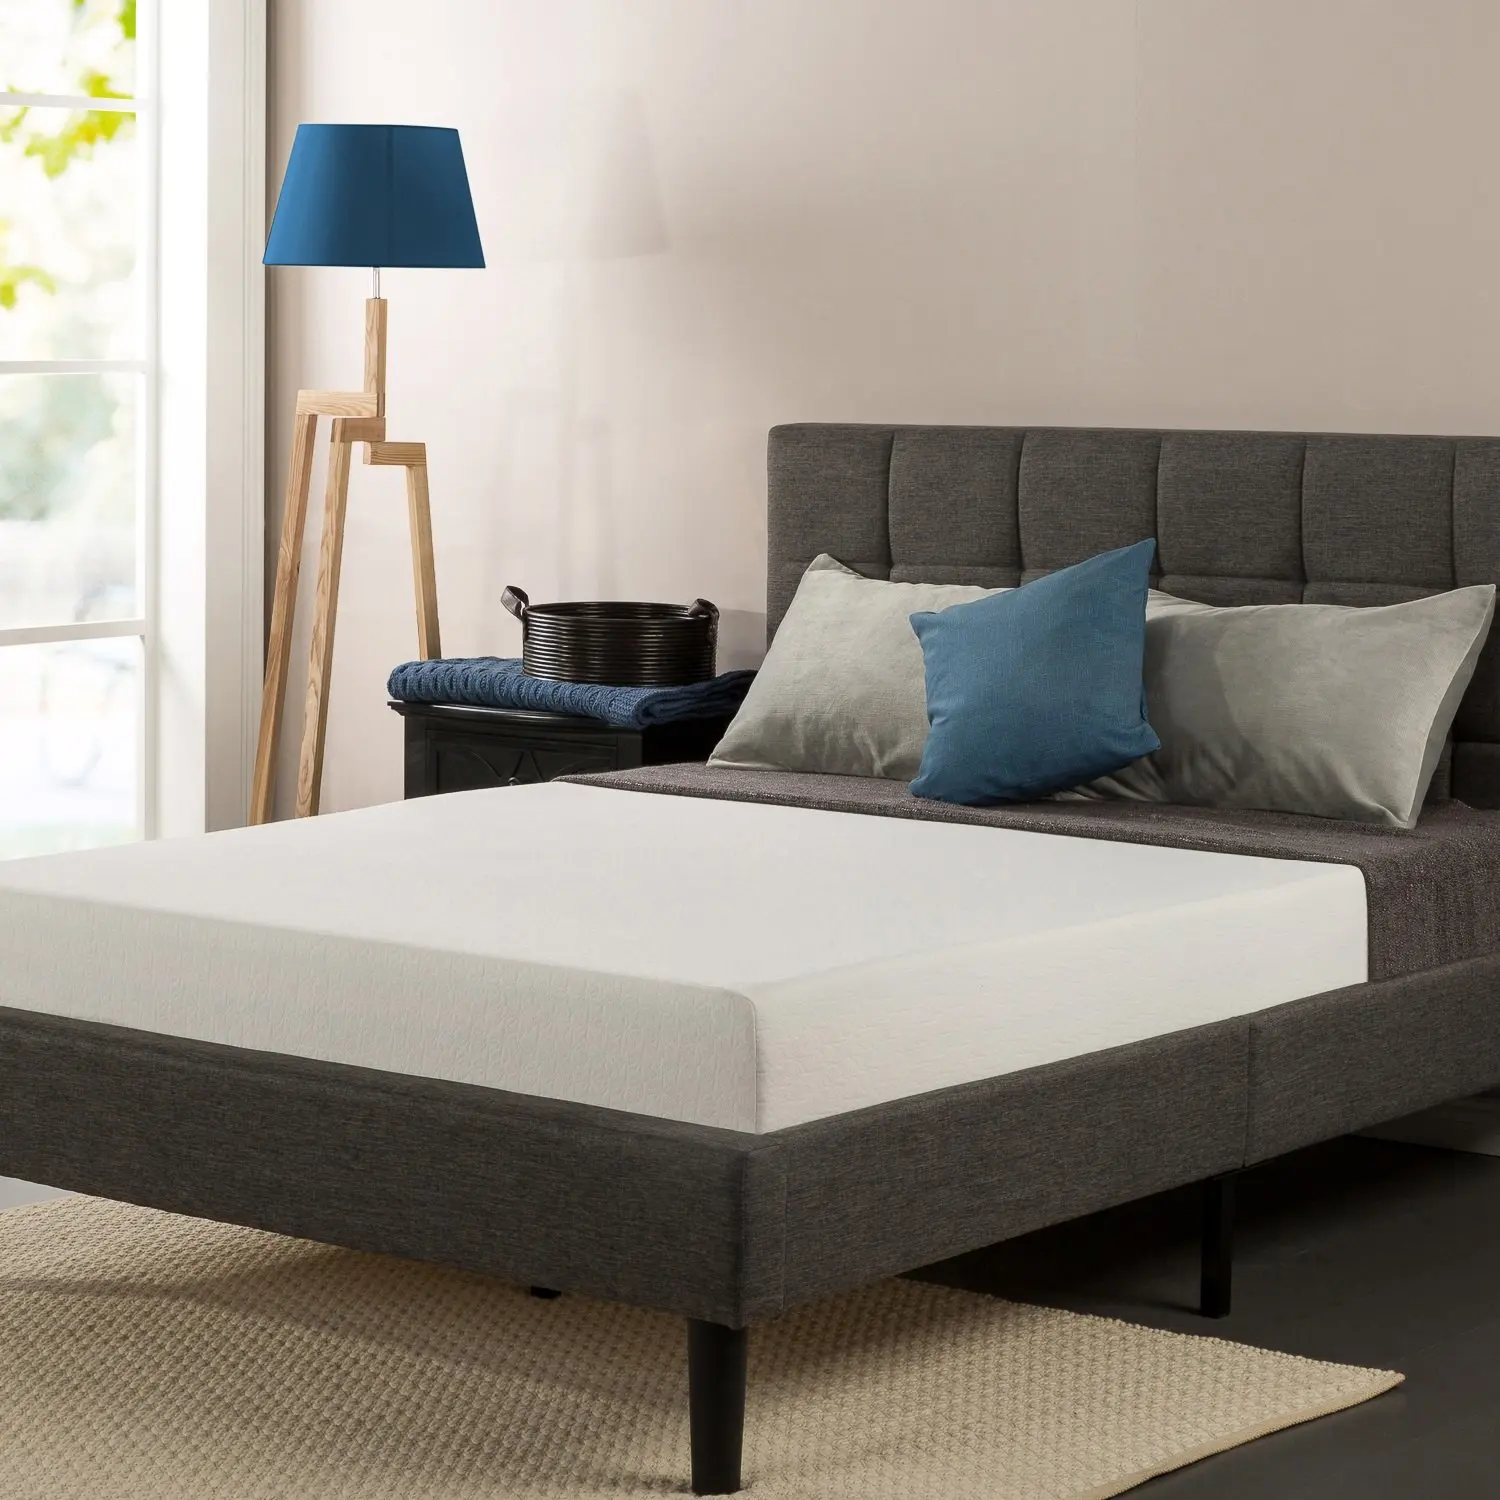 OEM new style have a  high quality and good sleep single size  memory foam mattress